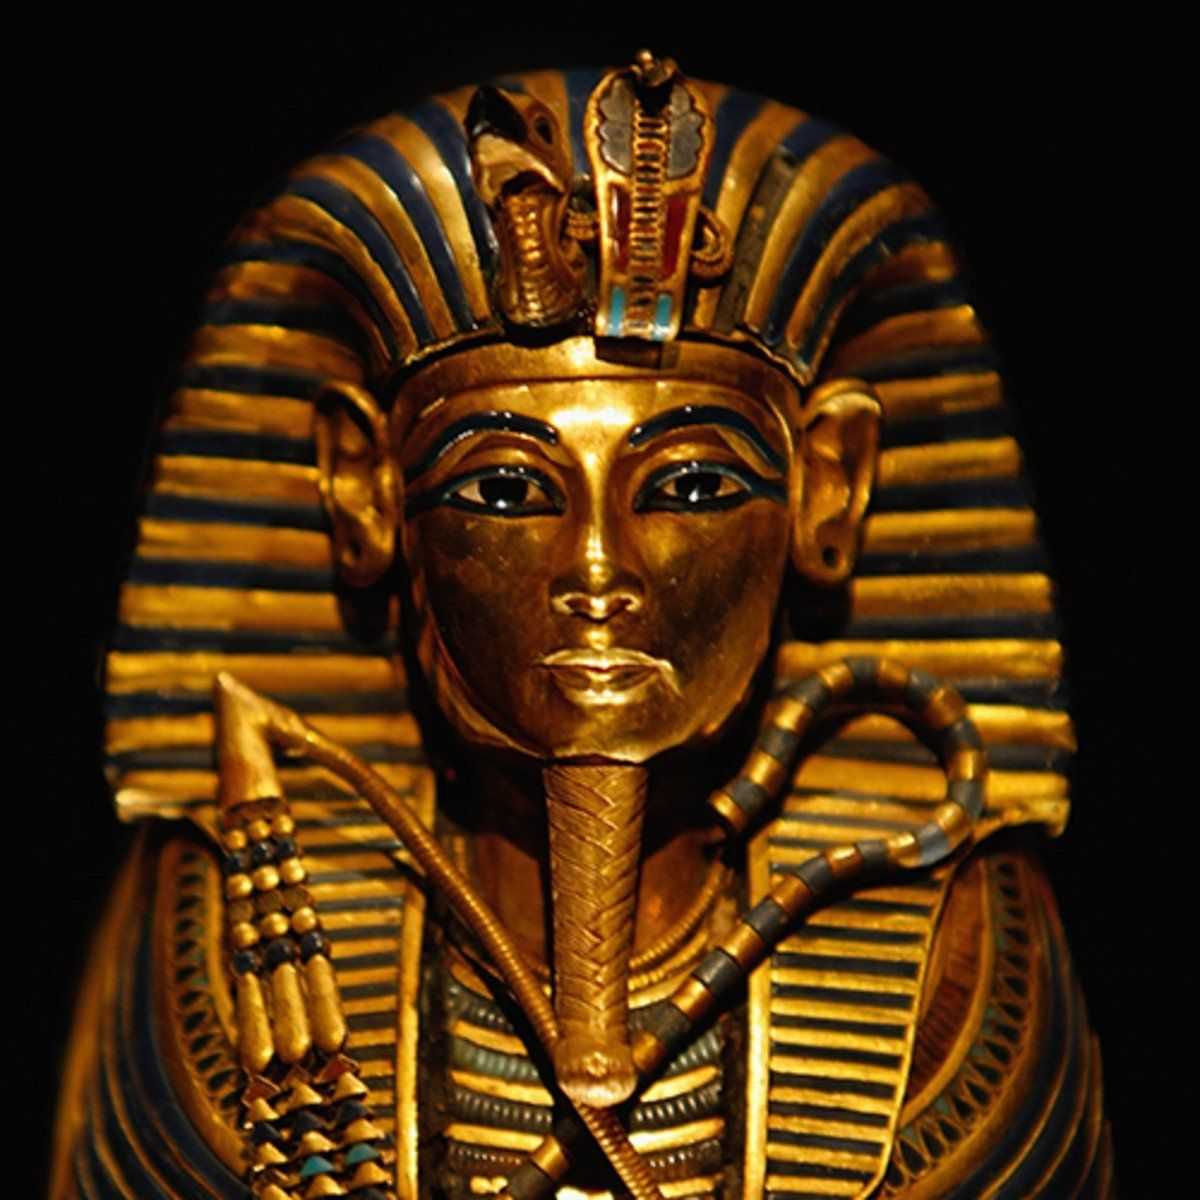 A statue of a pharaoh with a blue and gold crown